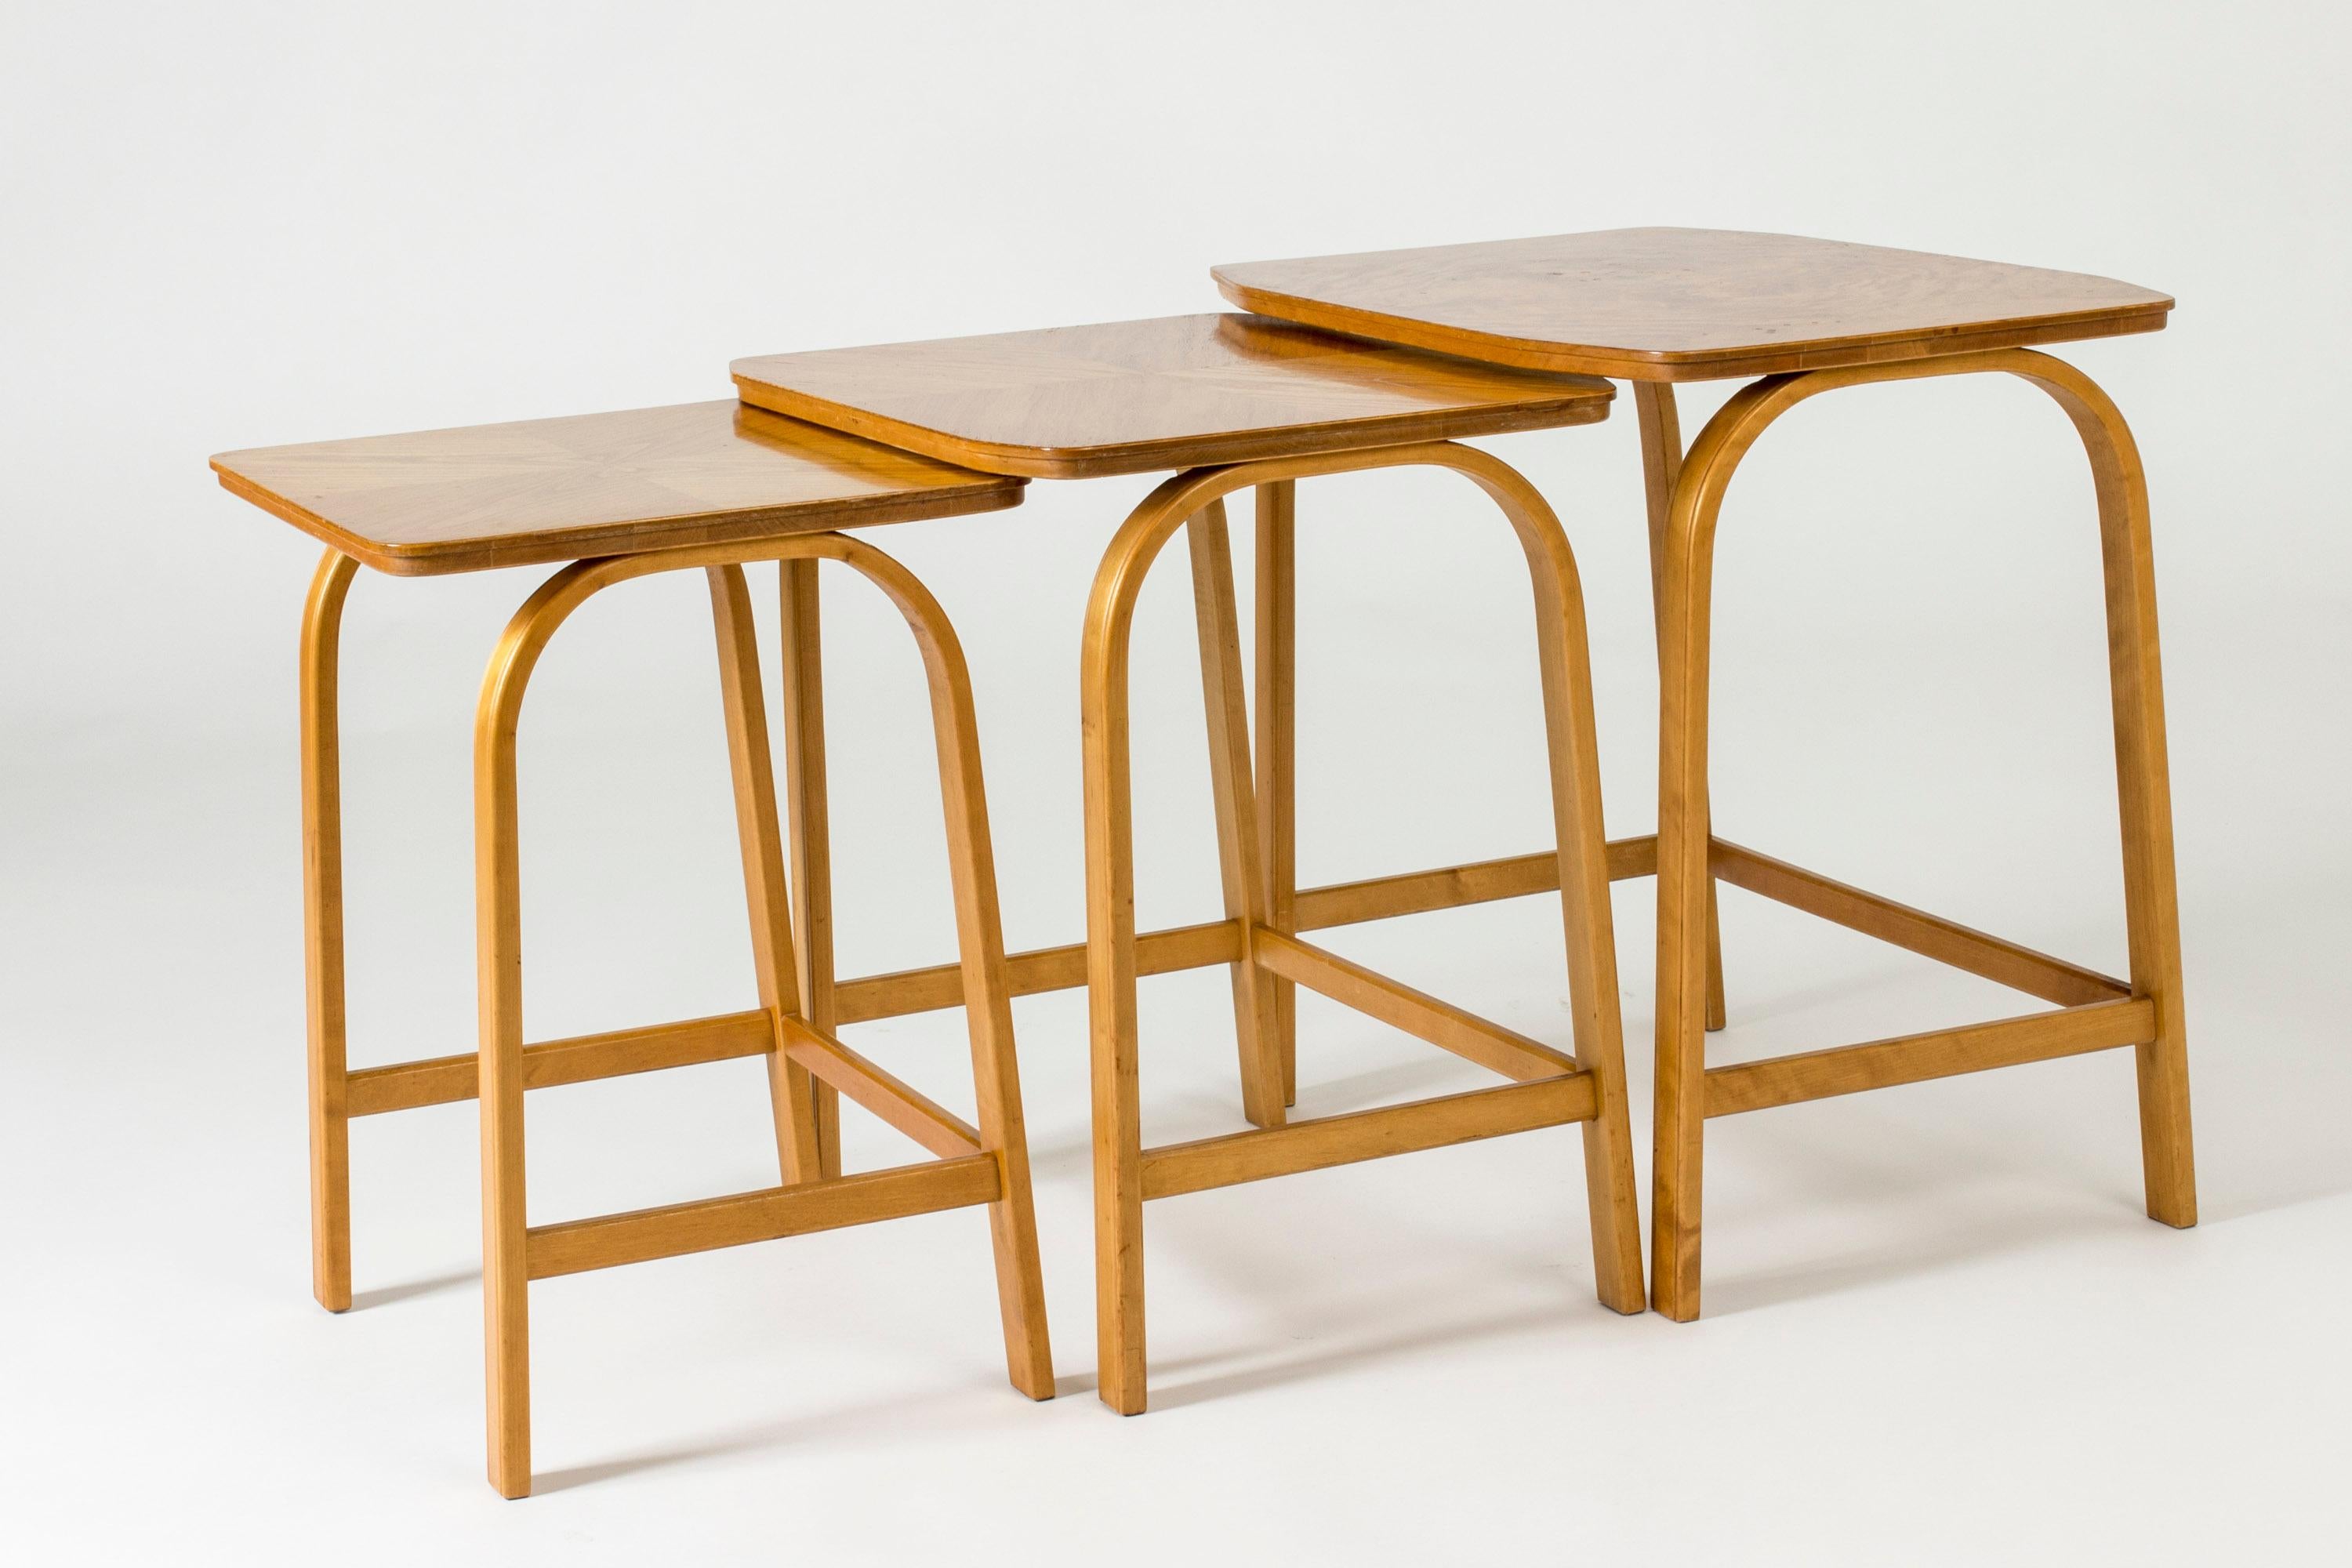 Swedish Modernist Birch Nesting Tables by Axel Larsson, Sweden, 1930s For Sale